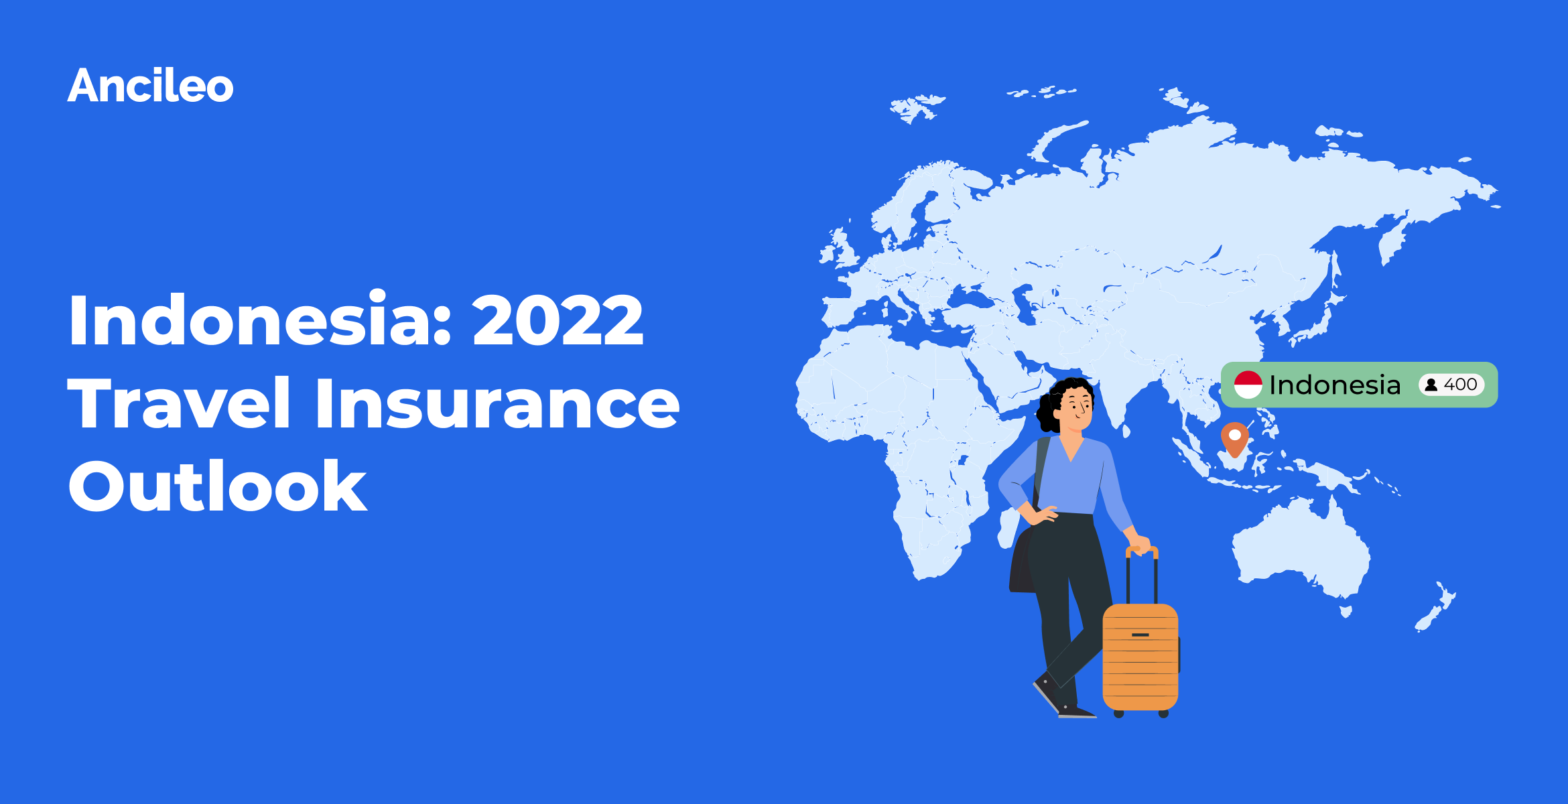 Indonesia: 2022 Travel Insurance Outlook